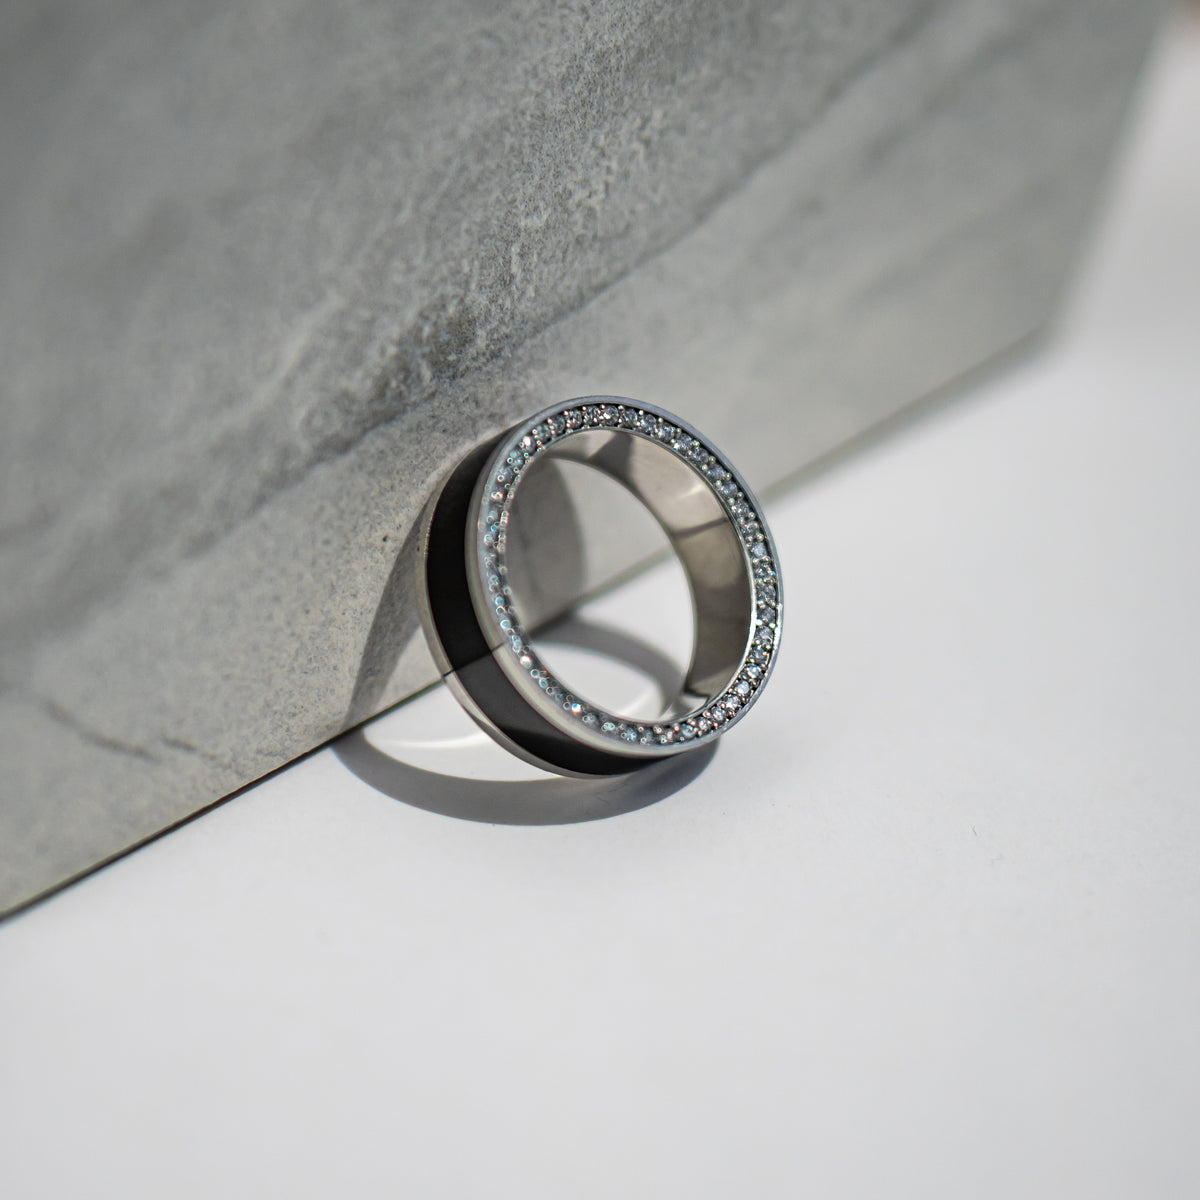 Zeus Polished Reverse Bevel with Diamond Insets in Platinum Ring 8MM